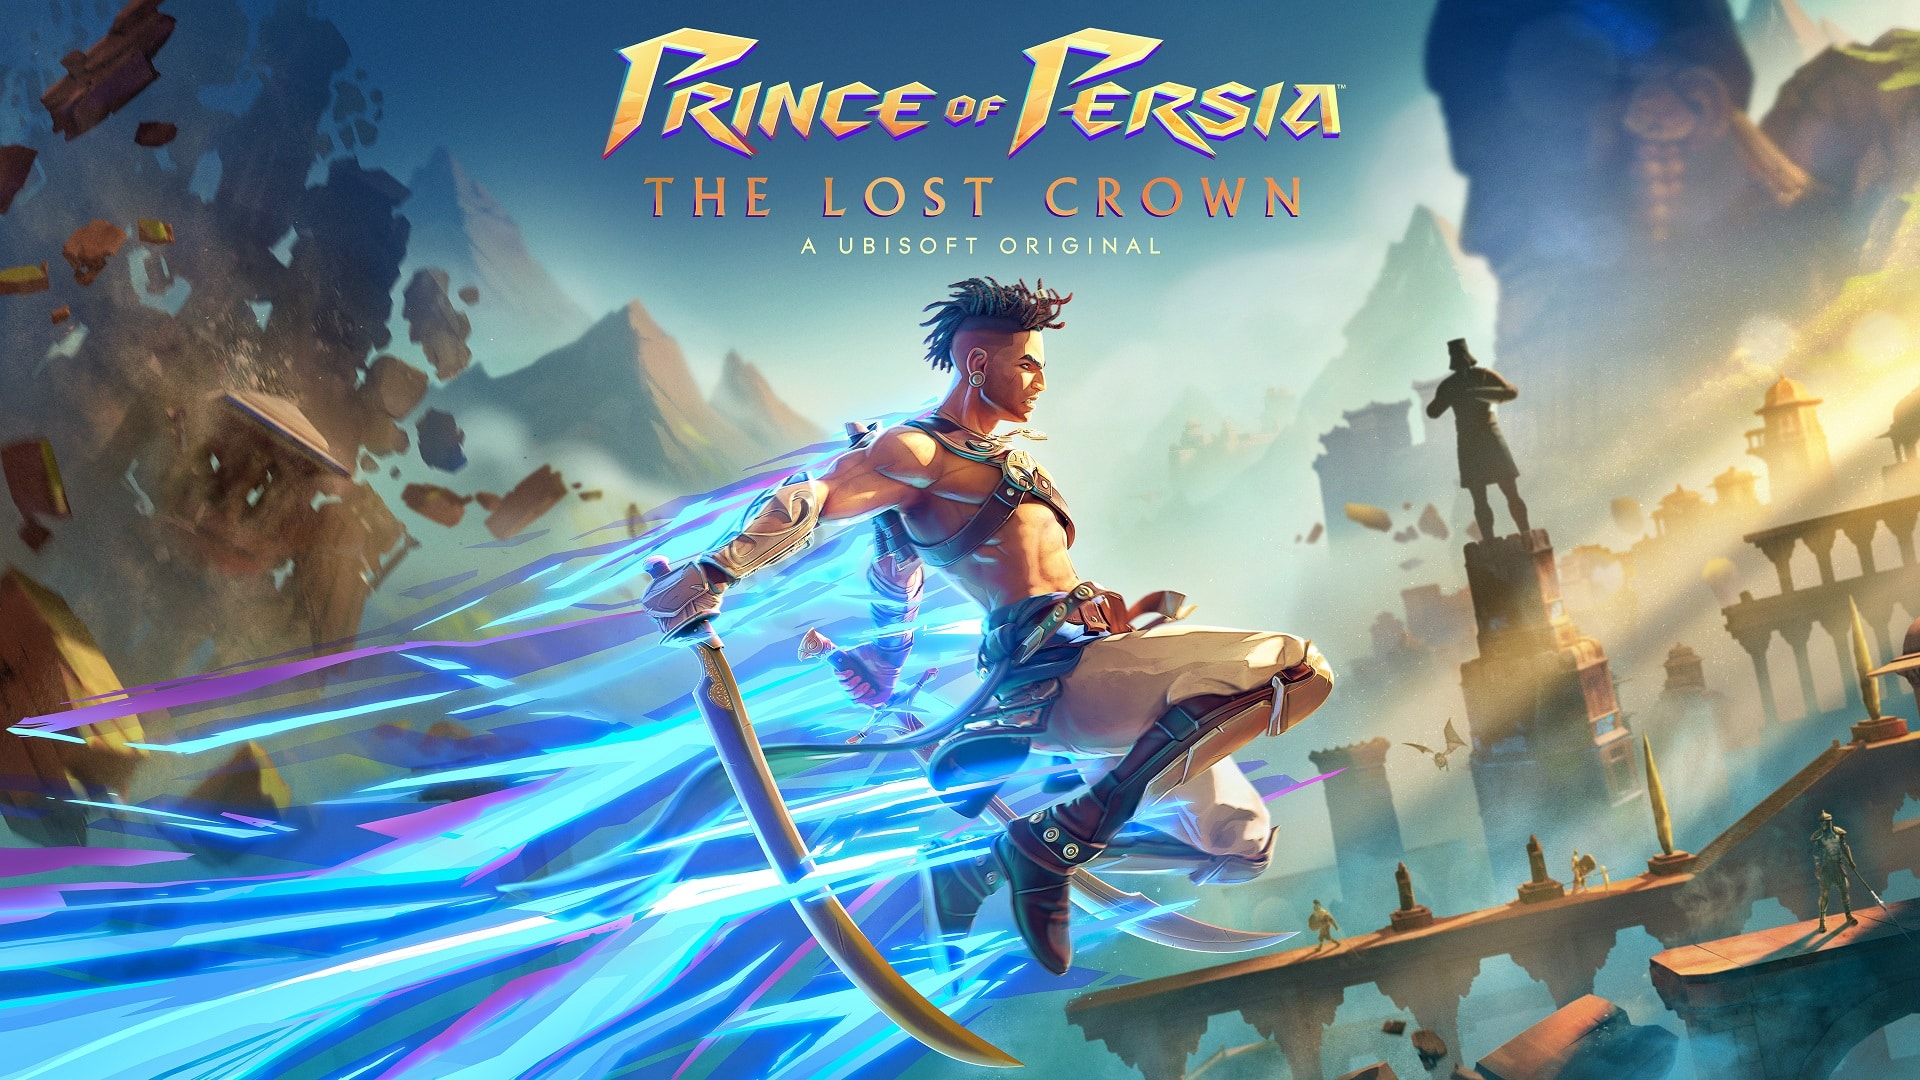 Prince of persia the lost crown key art 2